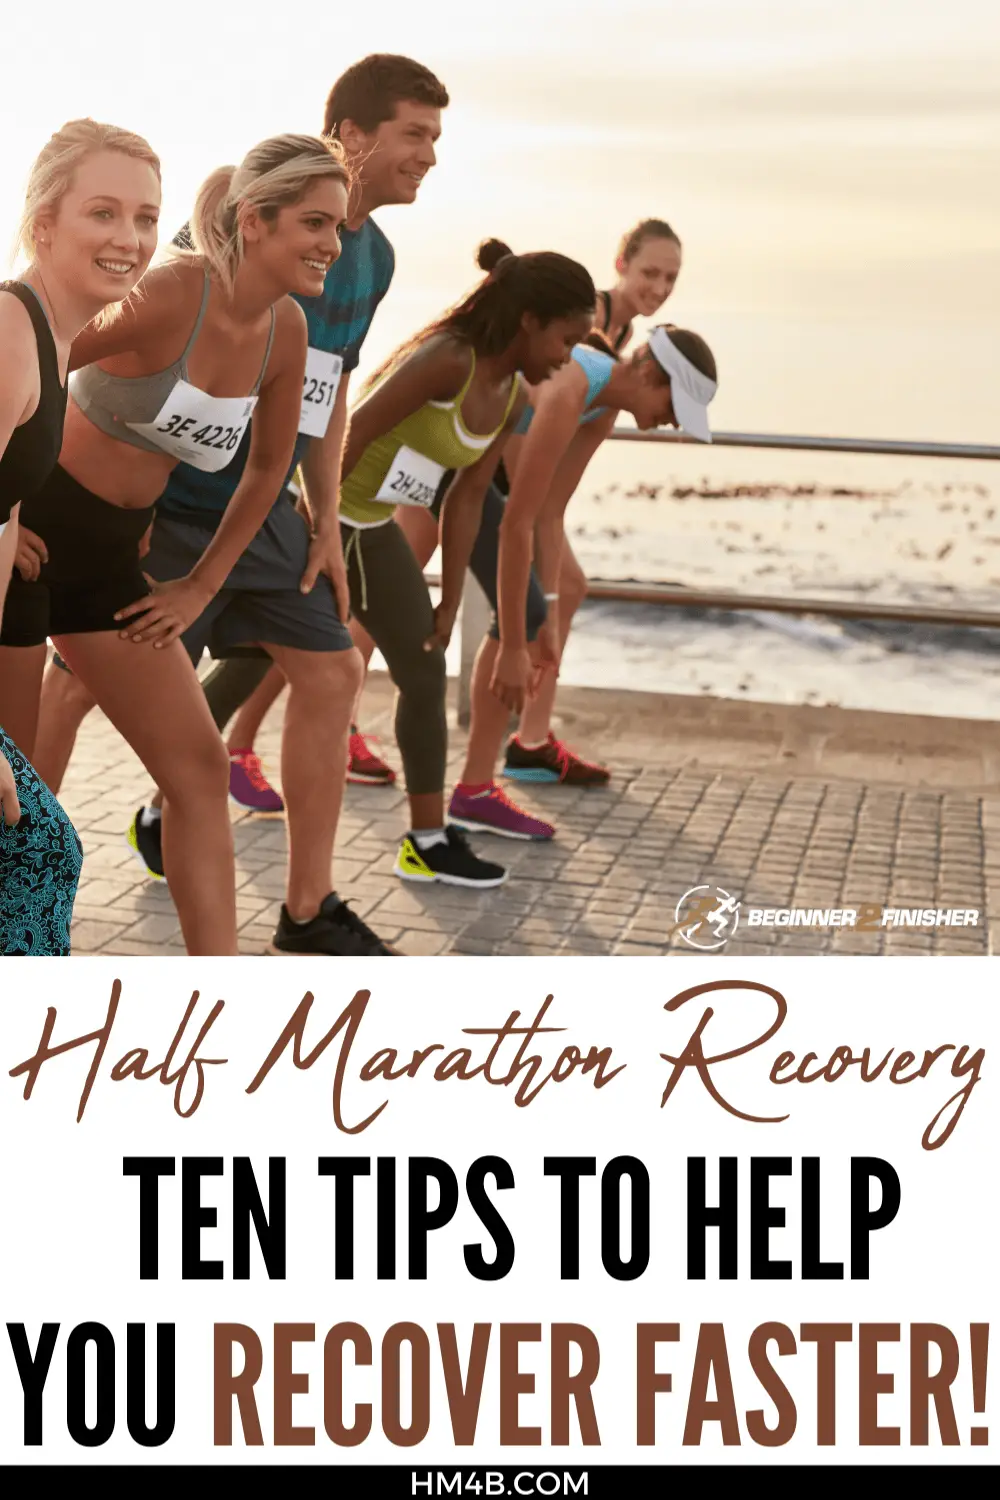 Half Marathon Recovery - Ten tips to help you recover faster!